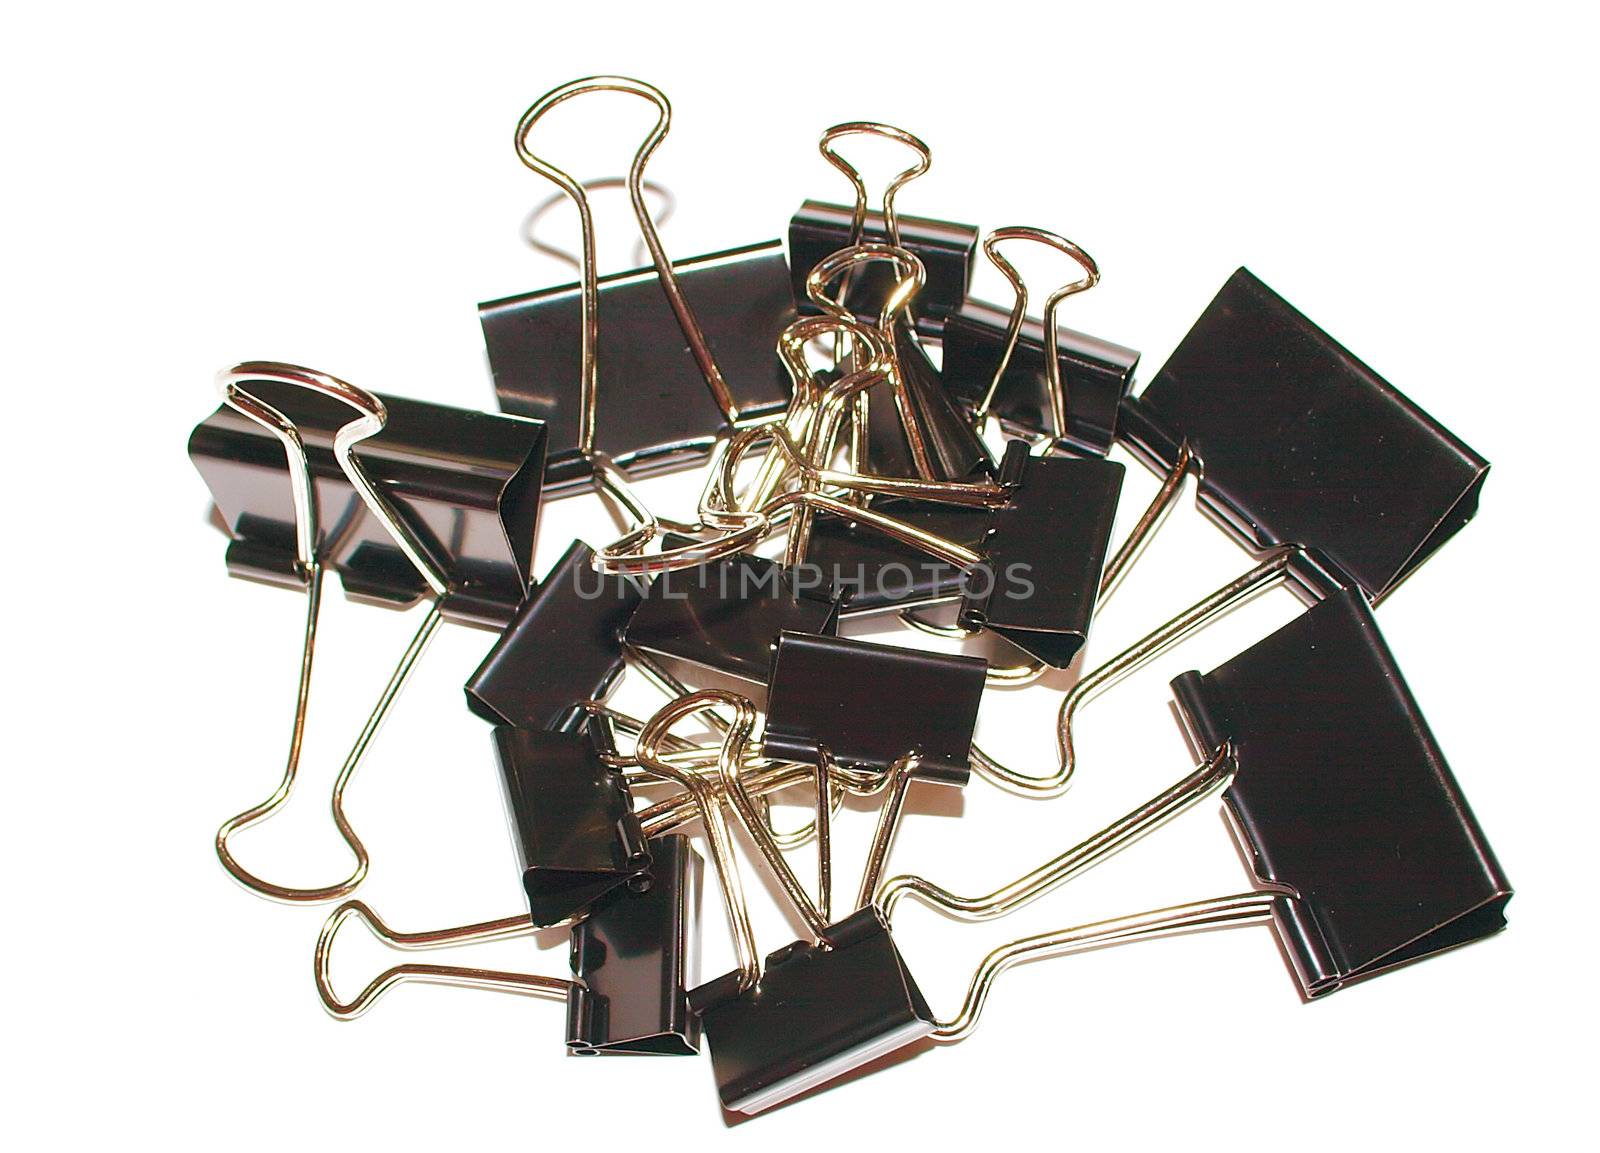 pile of bull clips by leafy